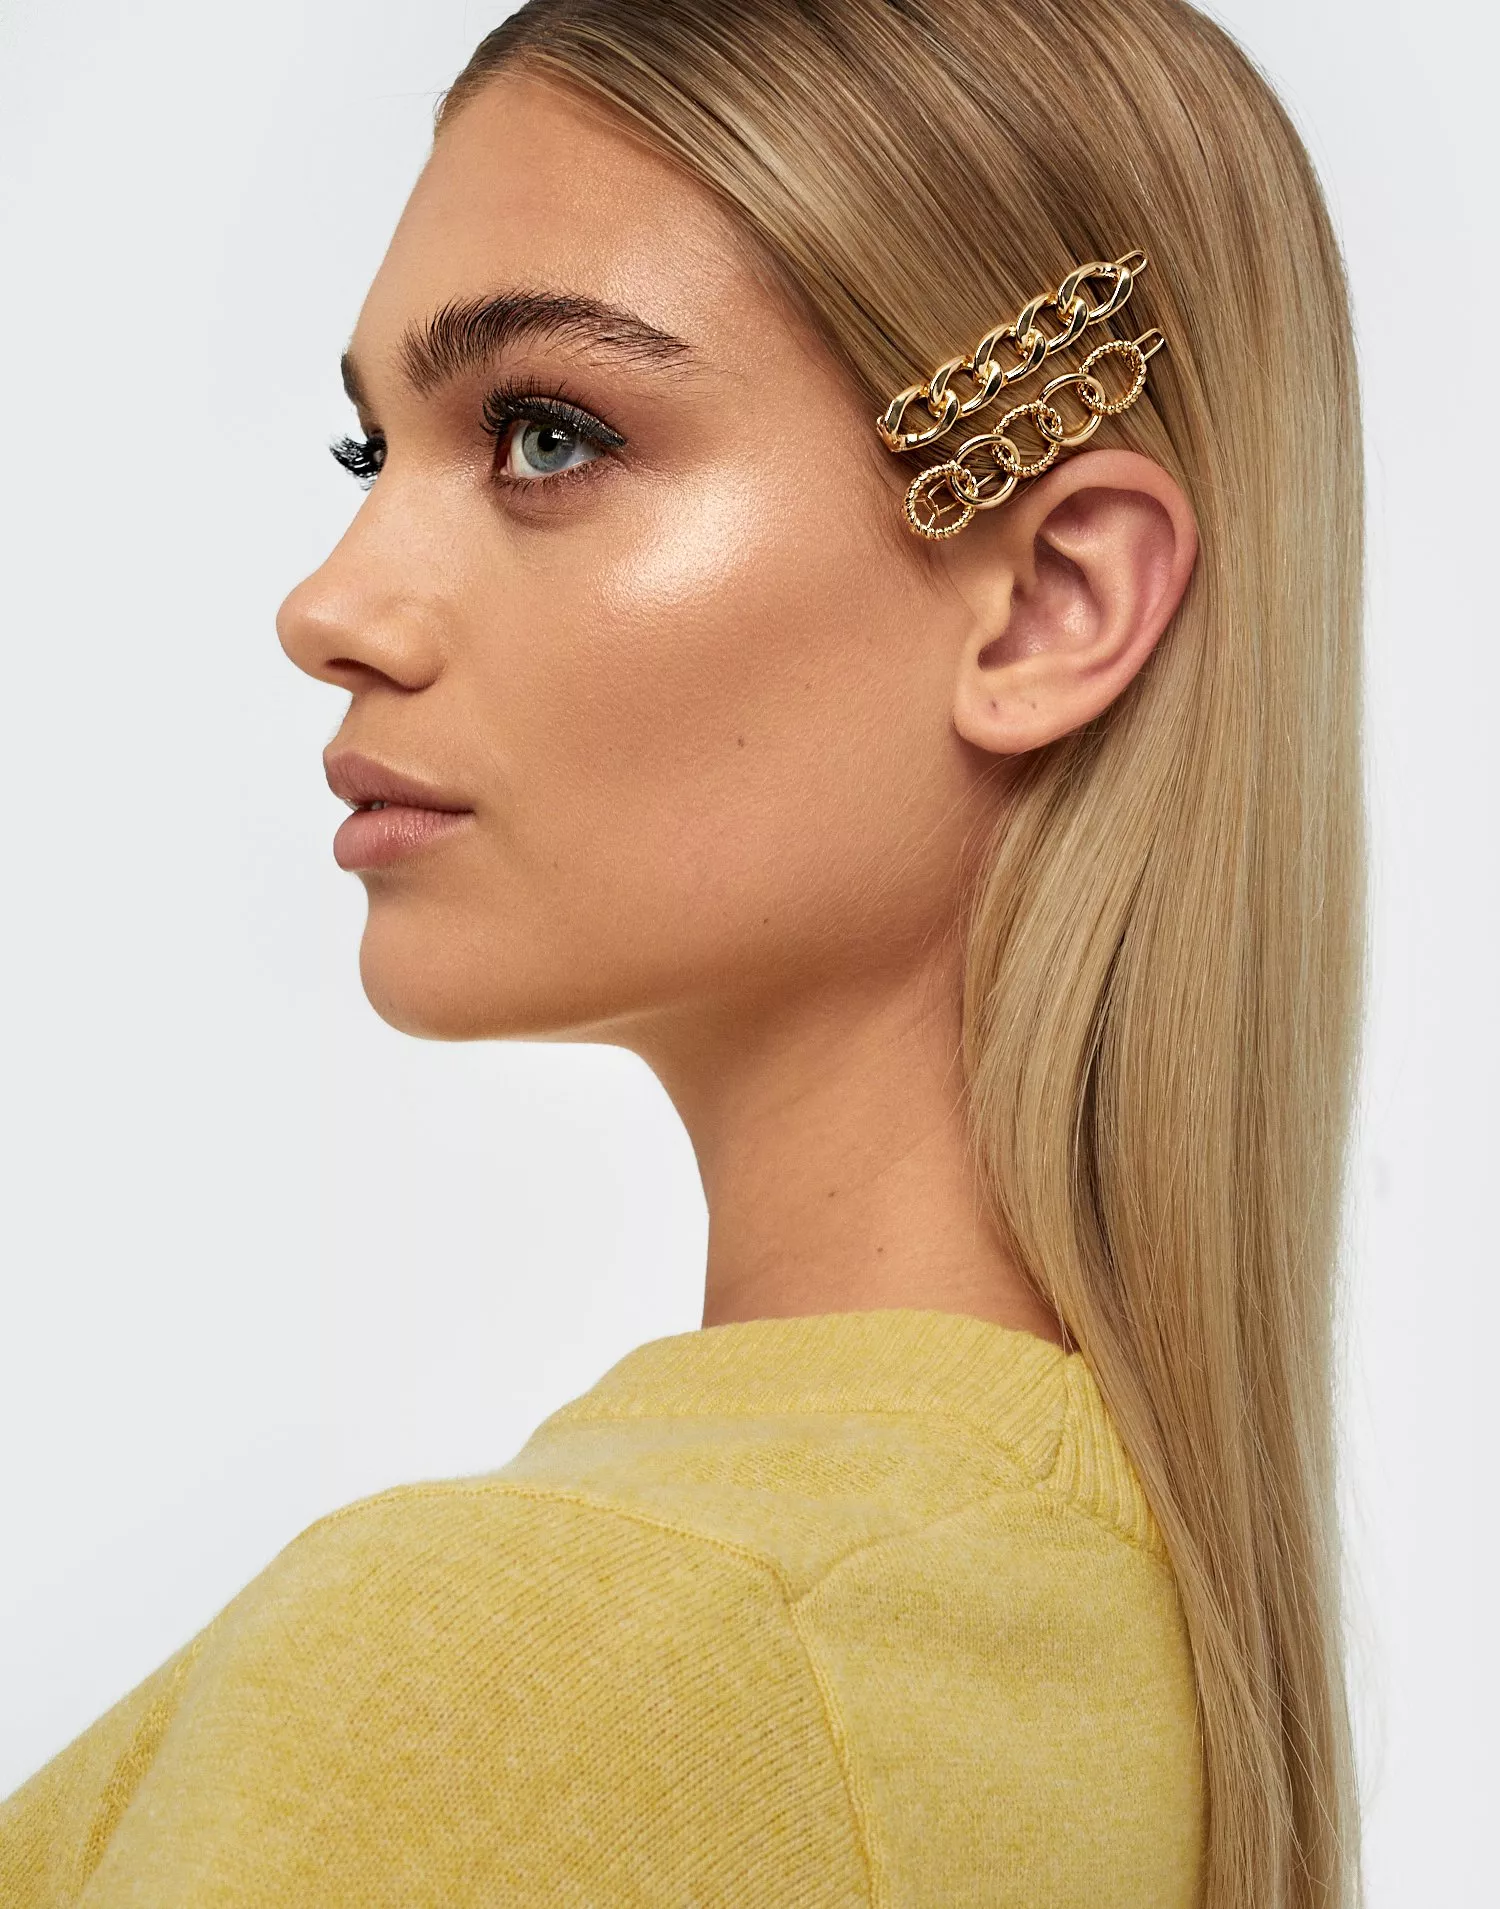 Buy Nelly 3 pack Chain Hair Clips - Gold 